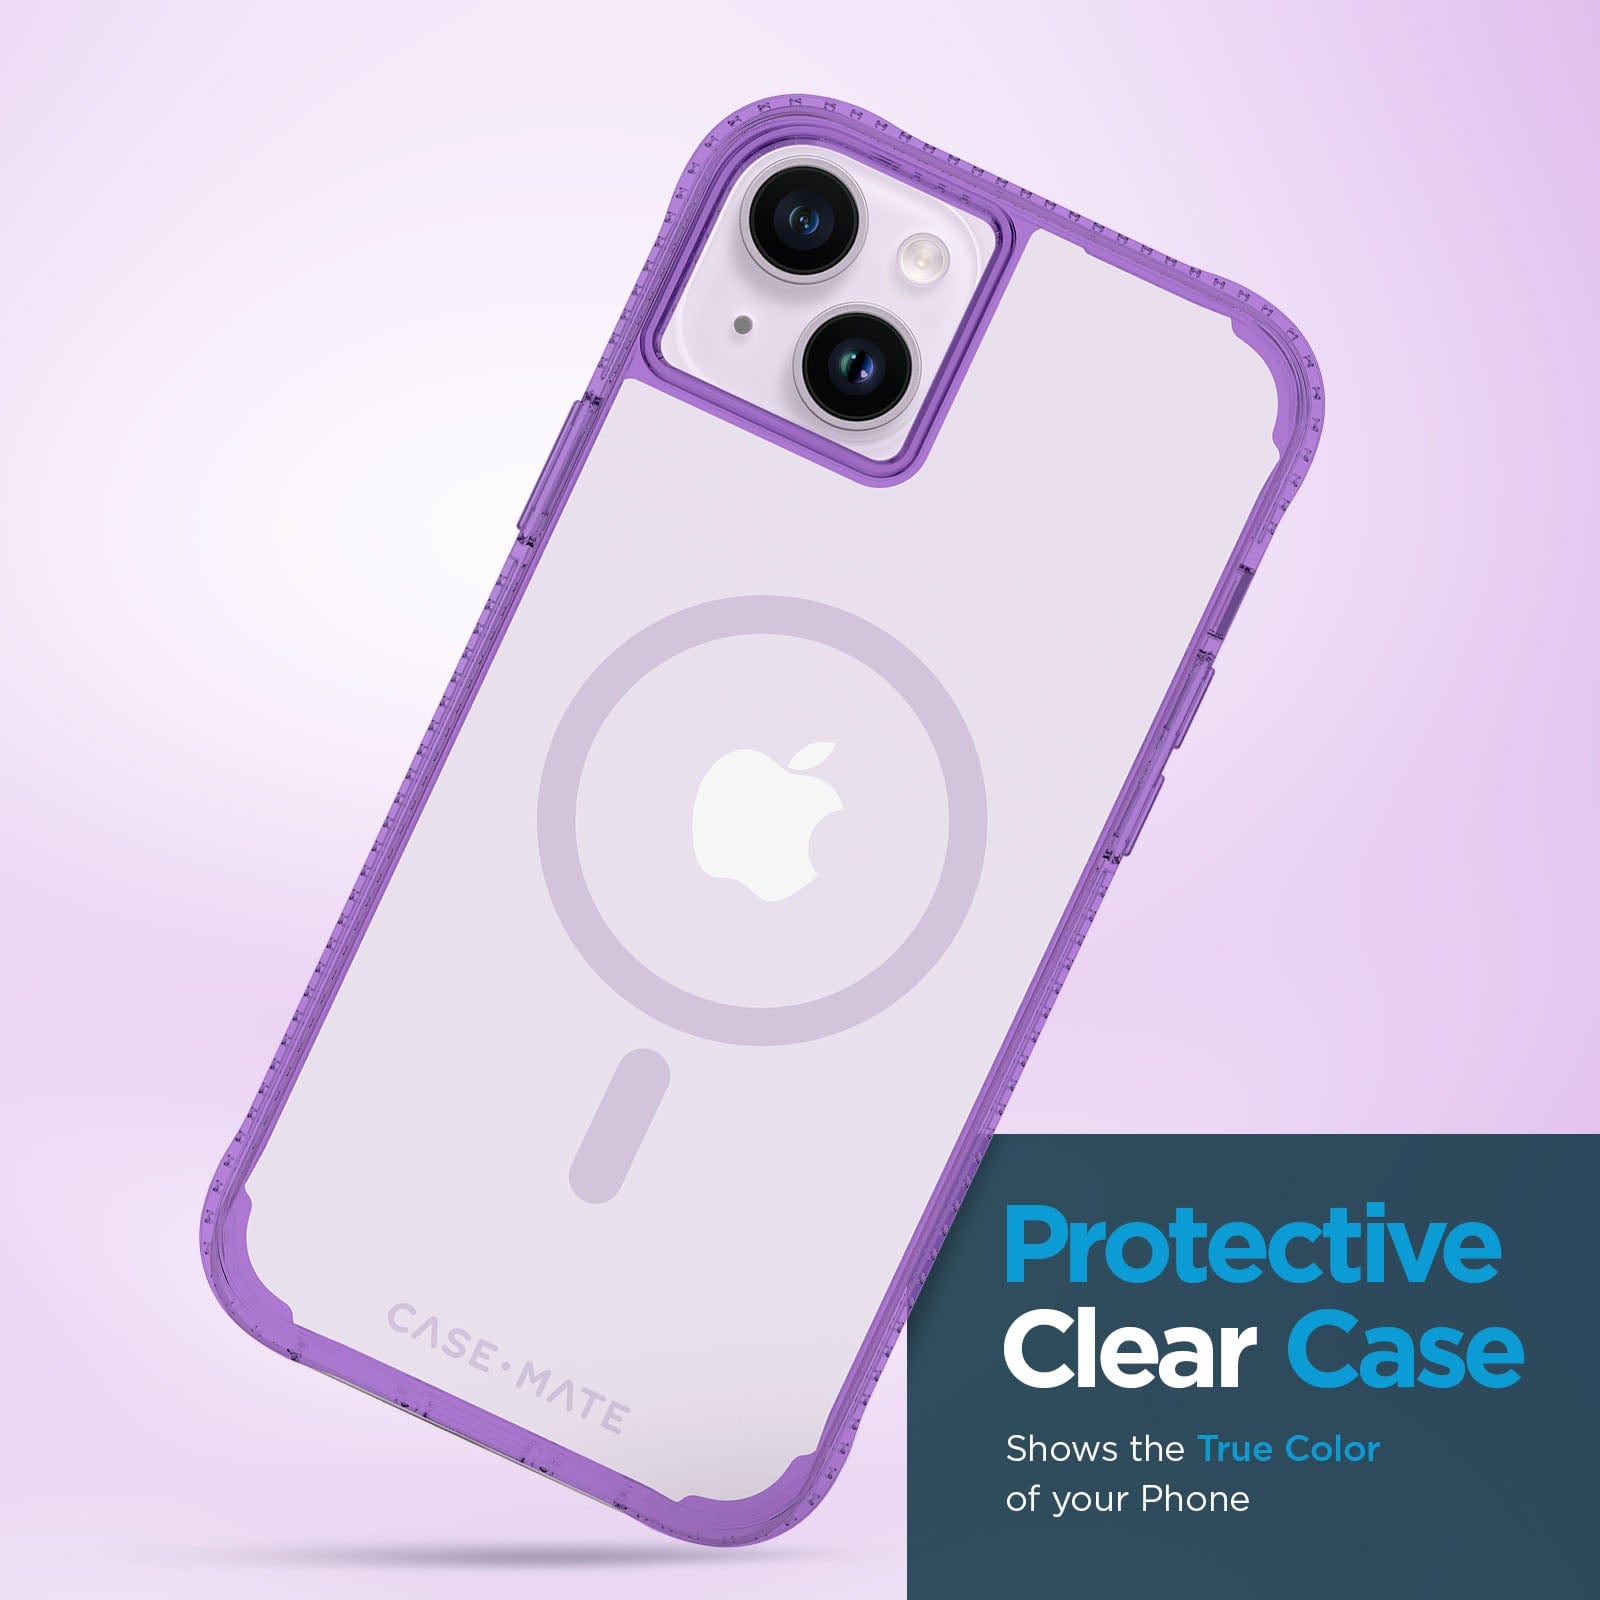 Protective clear case. Shows the true color of your phone. 